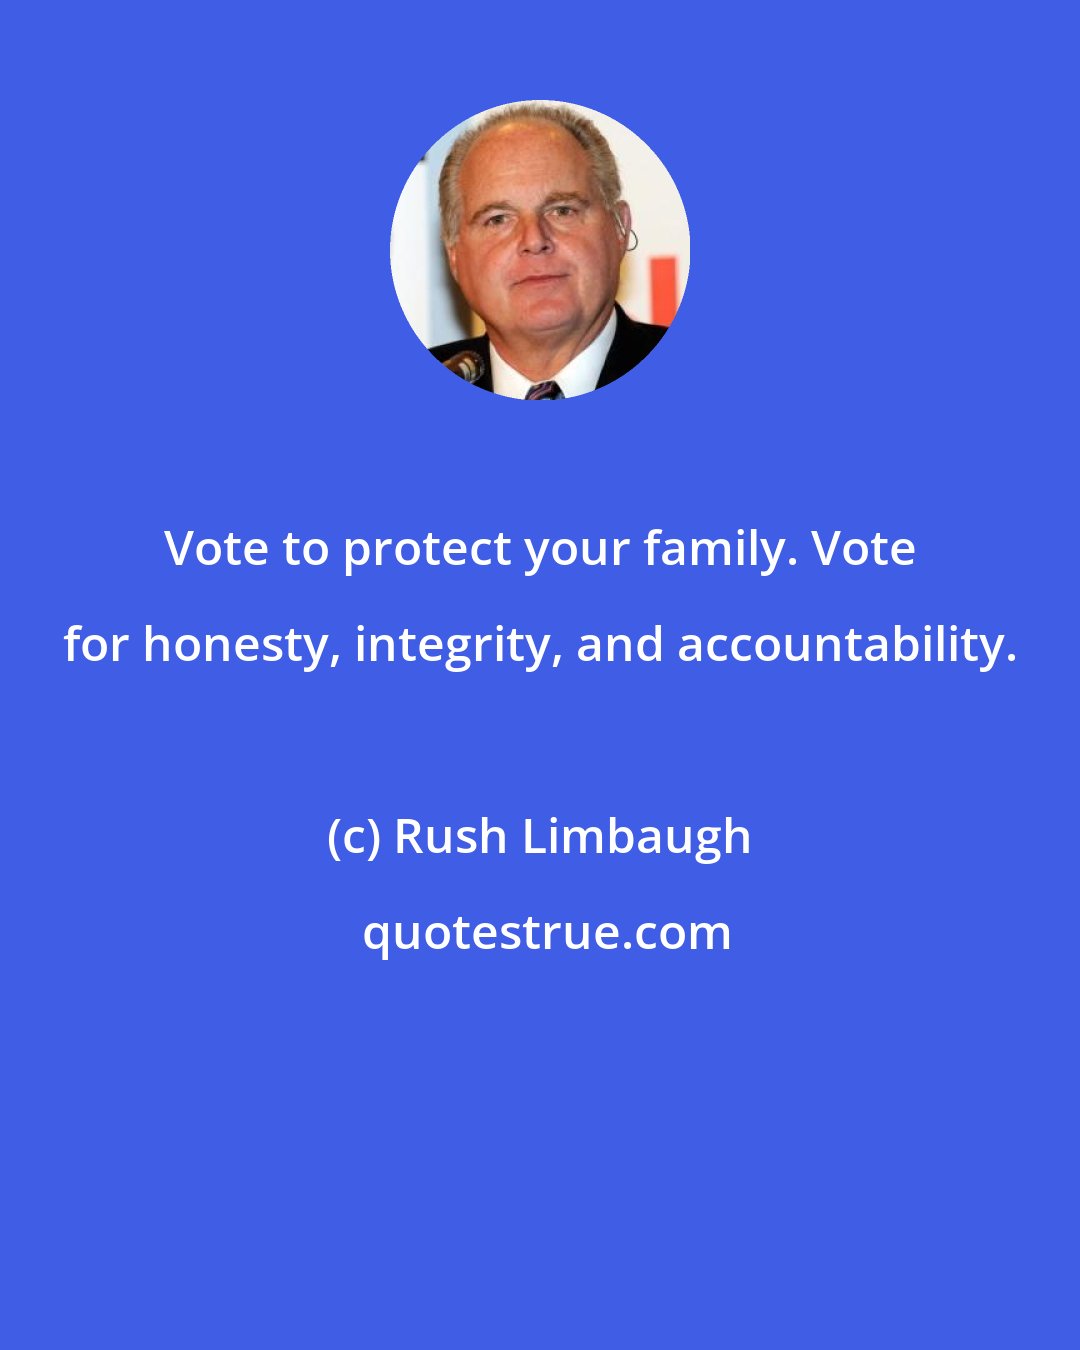 Rush Limbaugh: Vote to protect your family. Vote for honesty, integrity, and accountability.